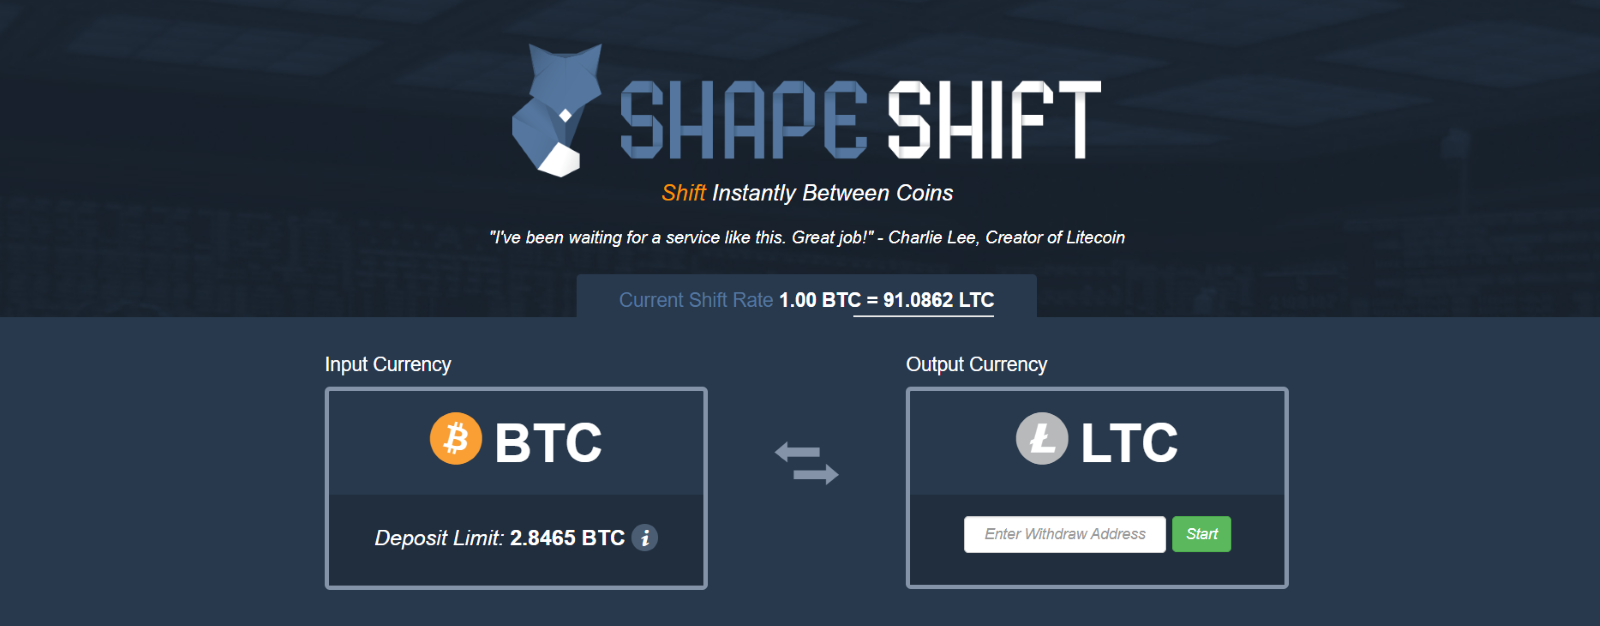 ShapeShift's home page in 2014 